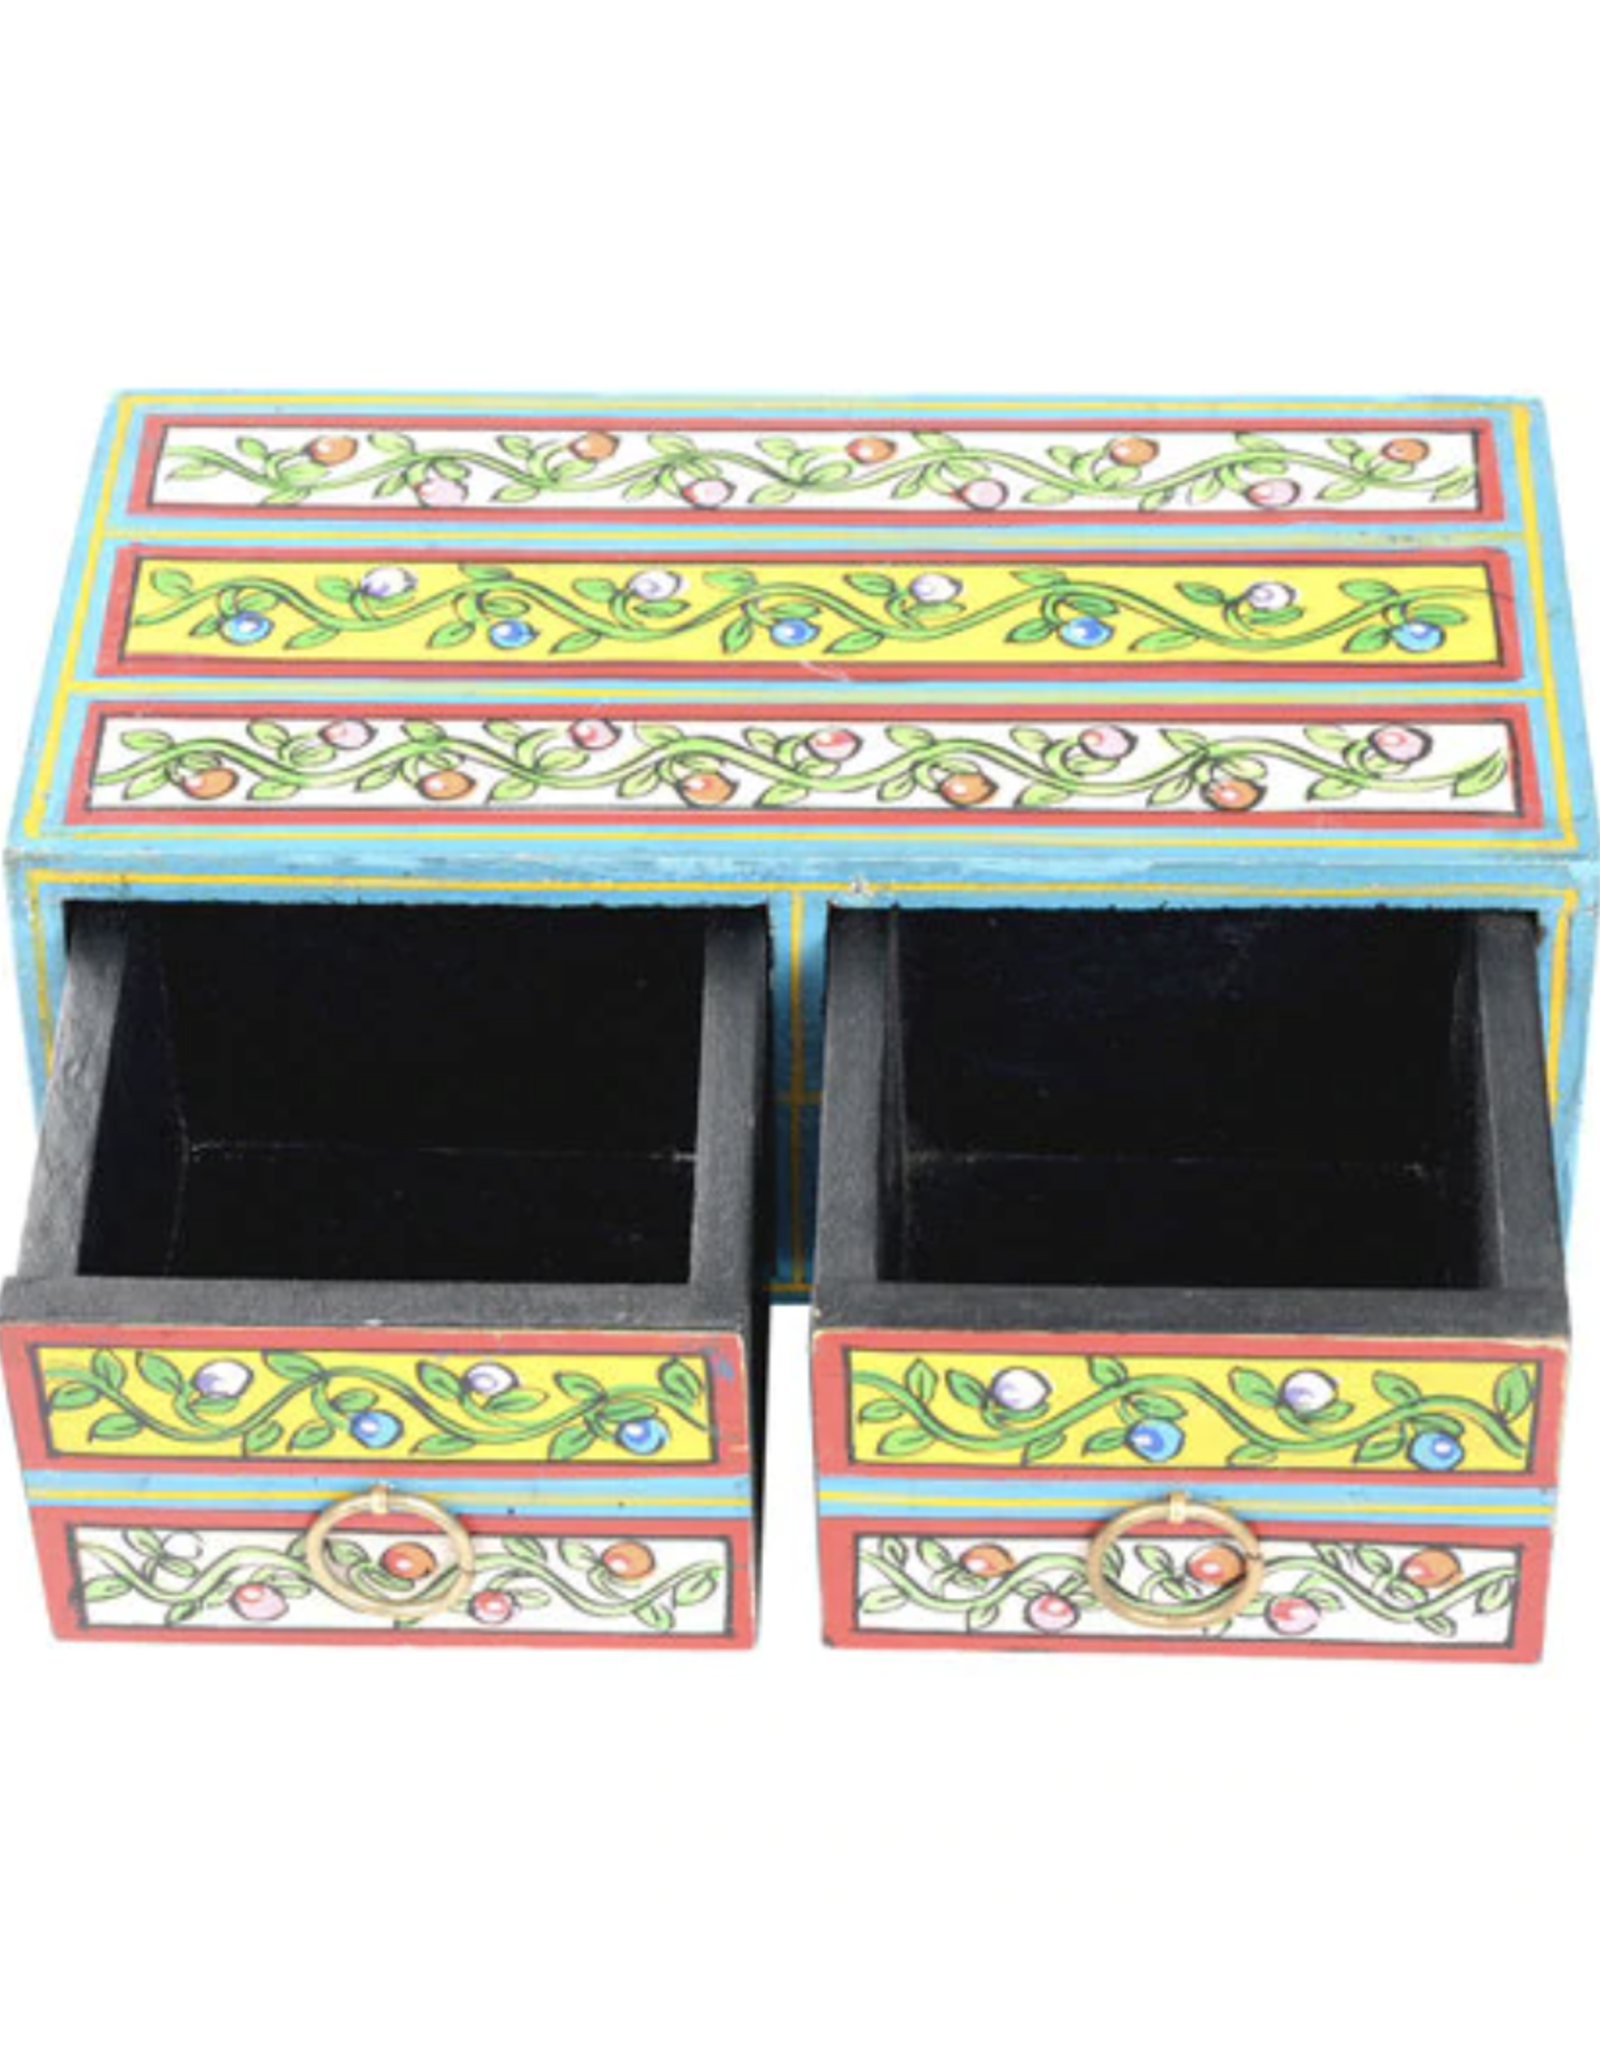 7.5" x 5.5" Hand Painted Wooden Box w/ Drawers